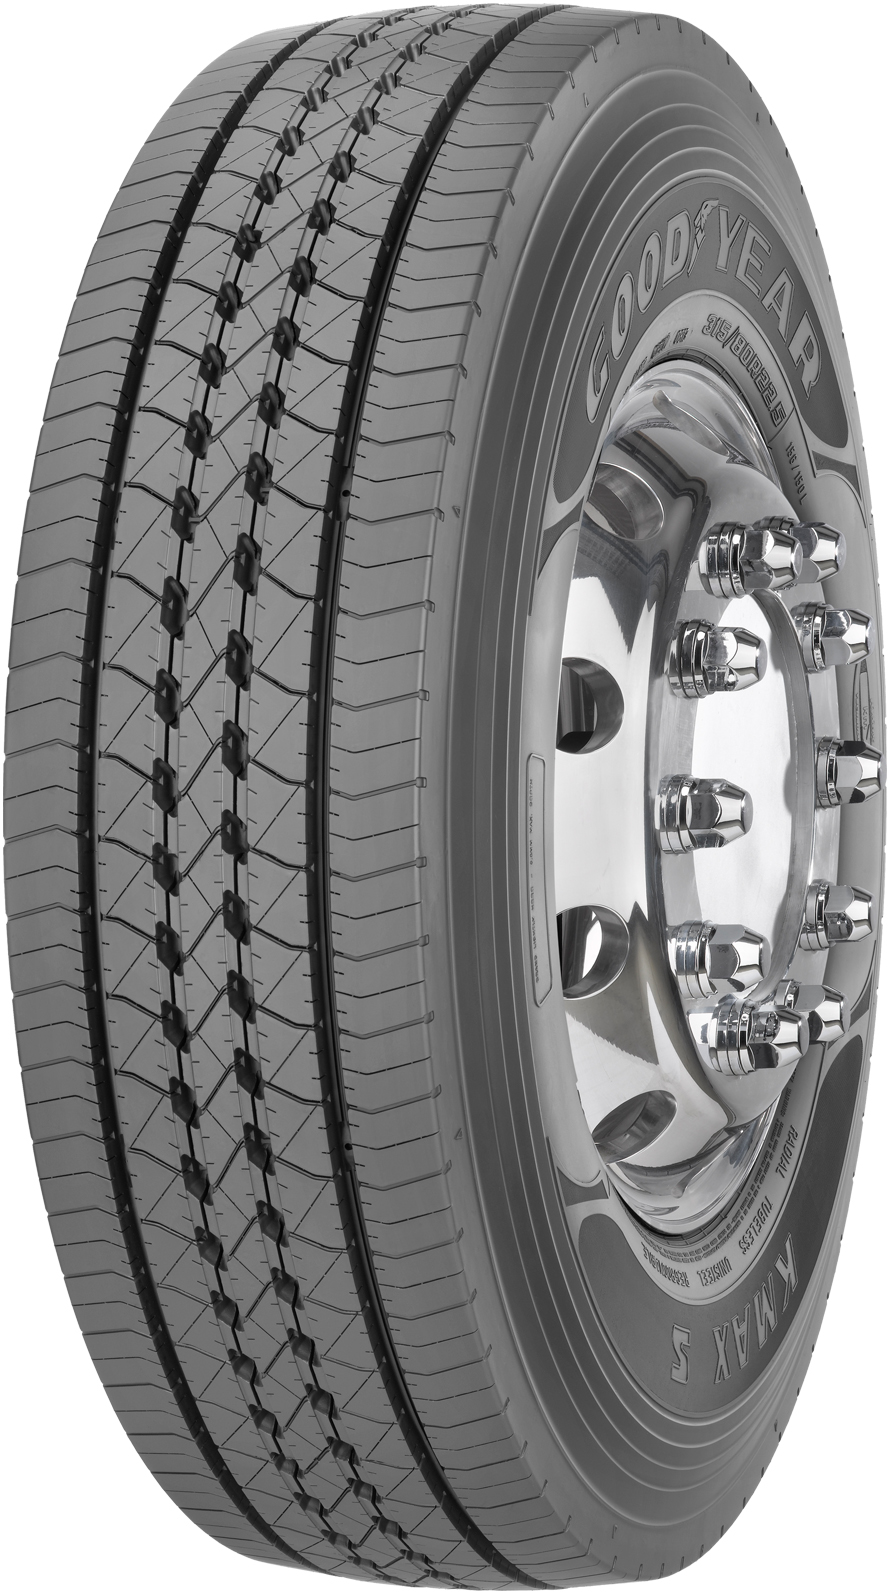 product_type-heavy_tires GOODYEAR KMAX S 16 TL 245/70 R17.5 136M